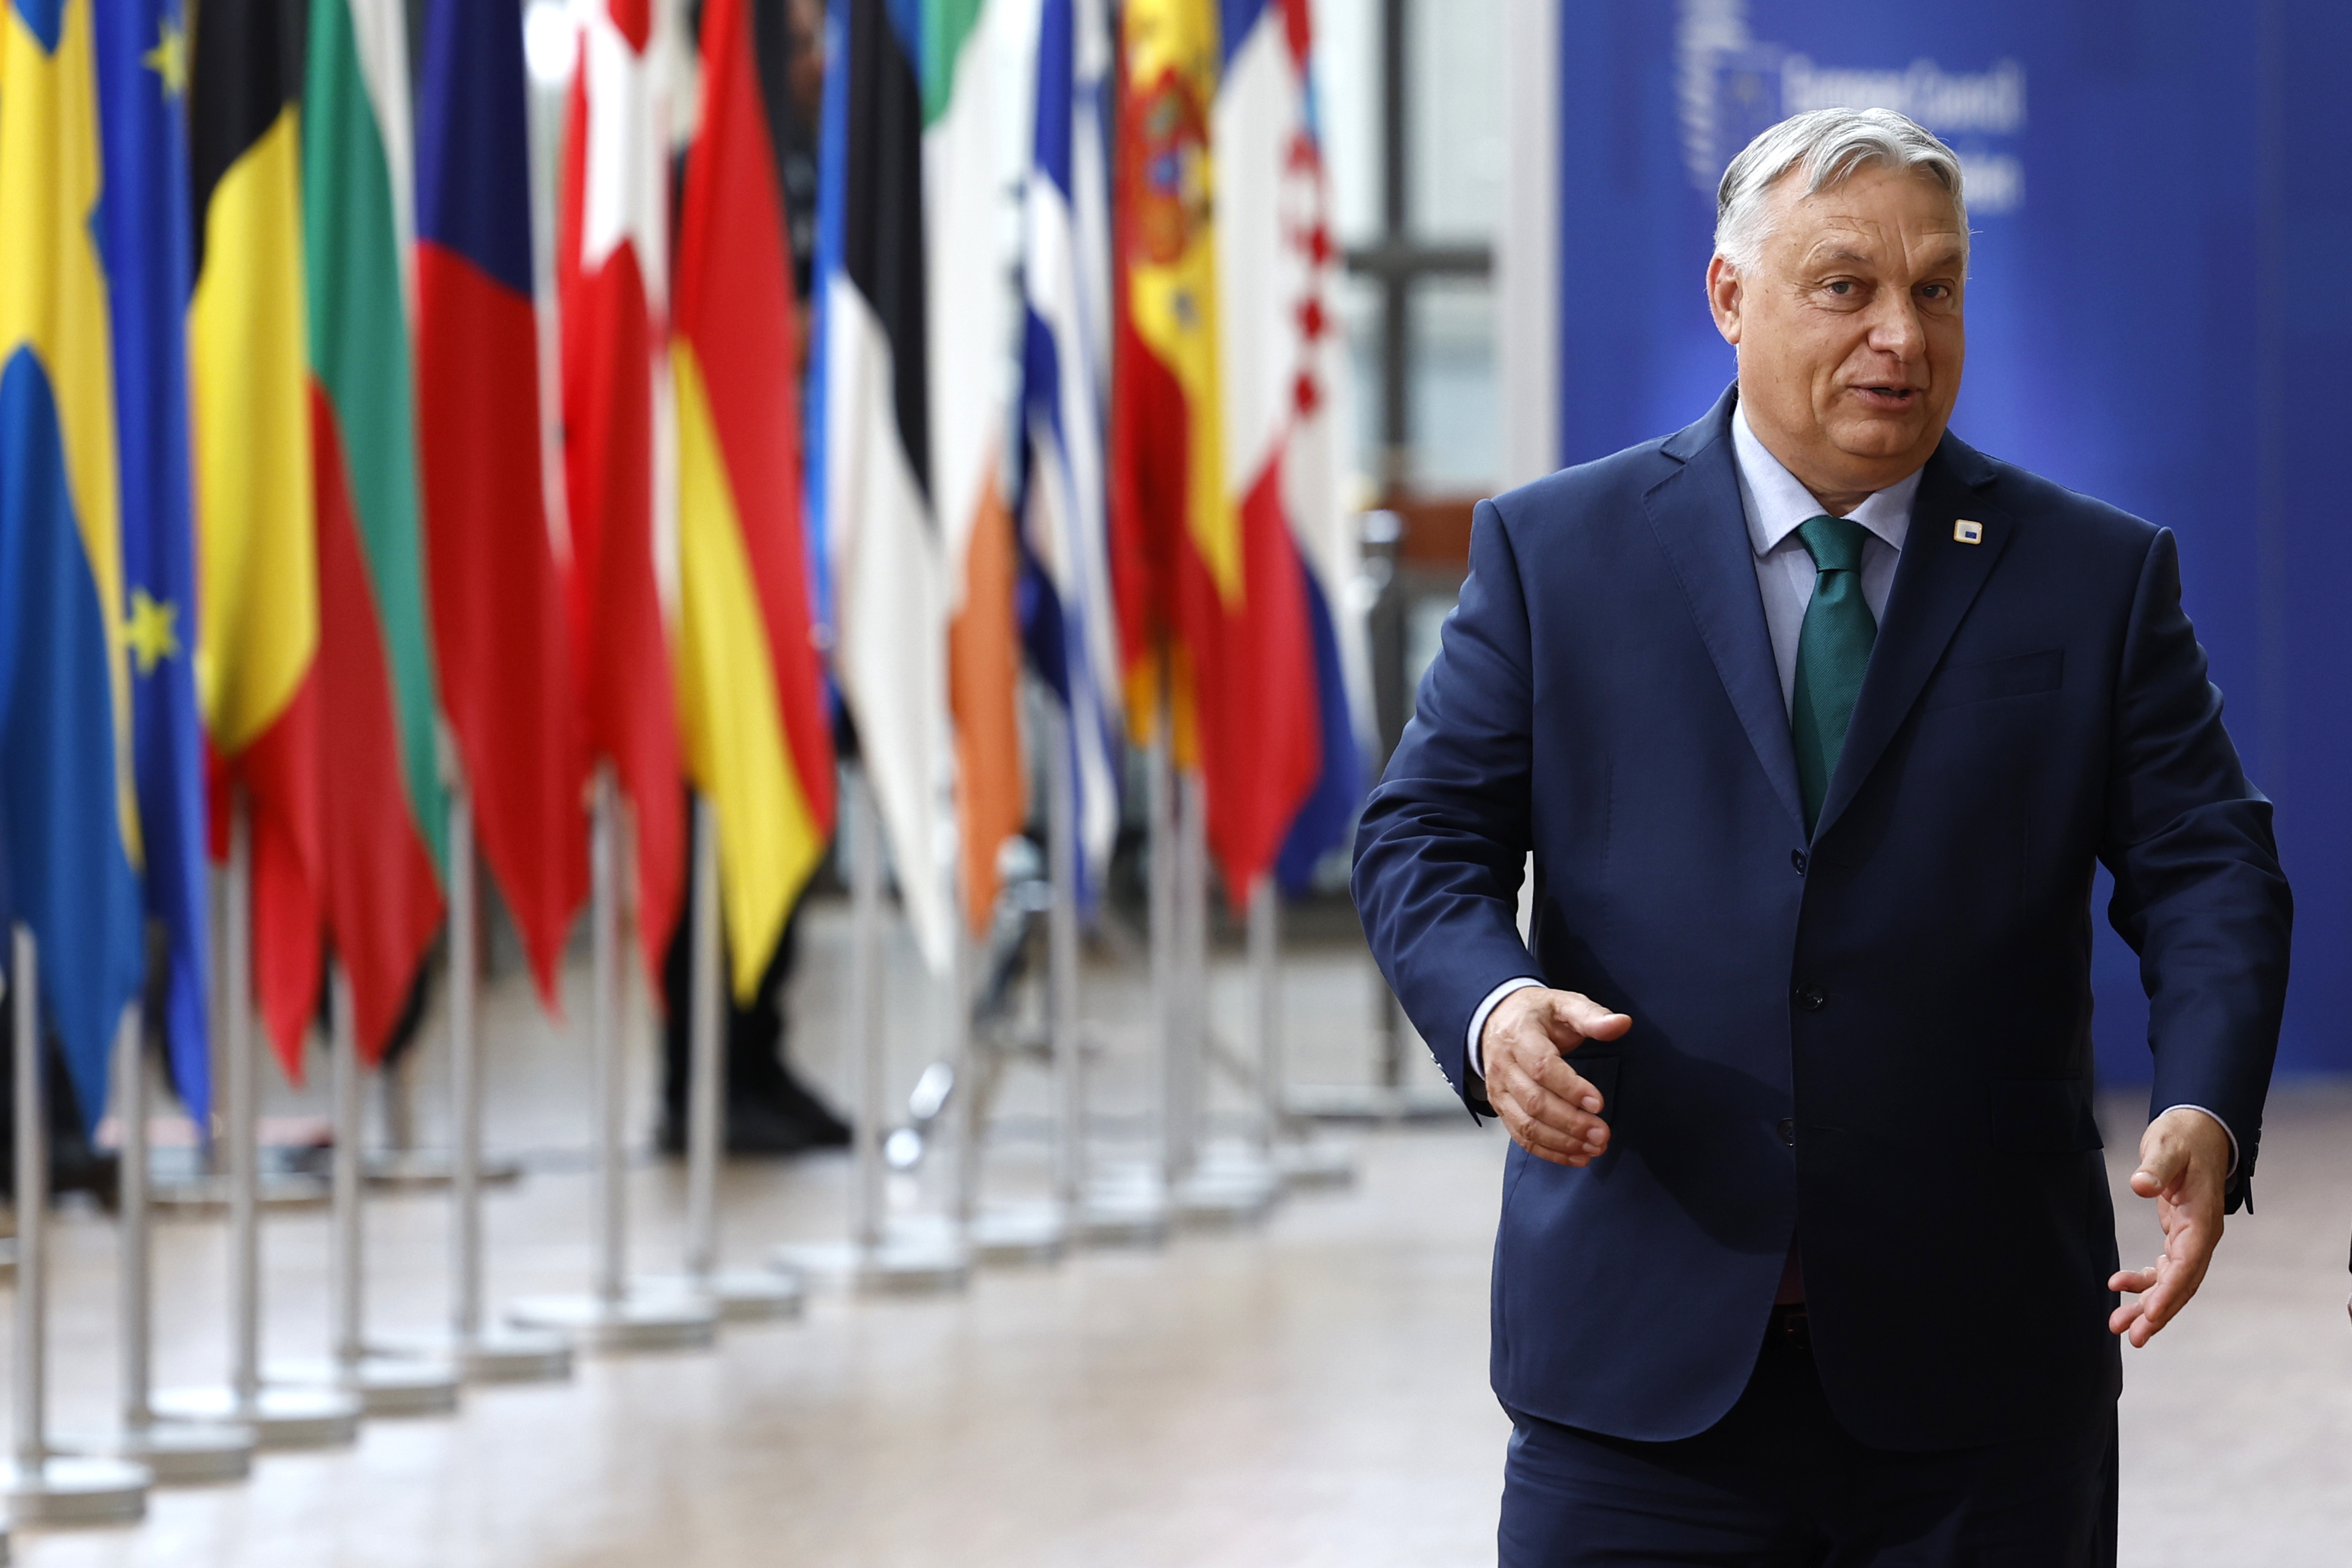 FILE - Hungary's Prime Minister Viktor Orban arrives for an EU summit in Brussels, on June 27, 2024. Orbán has presented a new alliance with Austria’s far-right Freedom Party and the main Czech opposition party, which hopes to attract other partners and become the biggest right-wing group in the European Parliament. Orbán traveled to Vienna Sunday, June 30, 2024, to present the “Patriots for Europe” alliance of his Fidesz party with the Freedom Party and former Czech Prime Minister Andrej Babiš’s ANO party — a day before Hungary takes over the European Union’s rotating presidency for six months. (AP Photo/Geert Vanden Wijngaert)